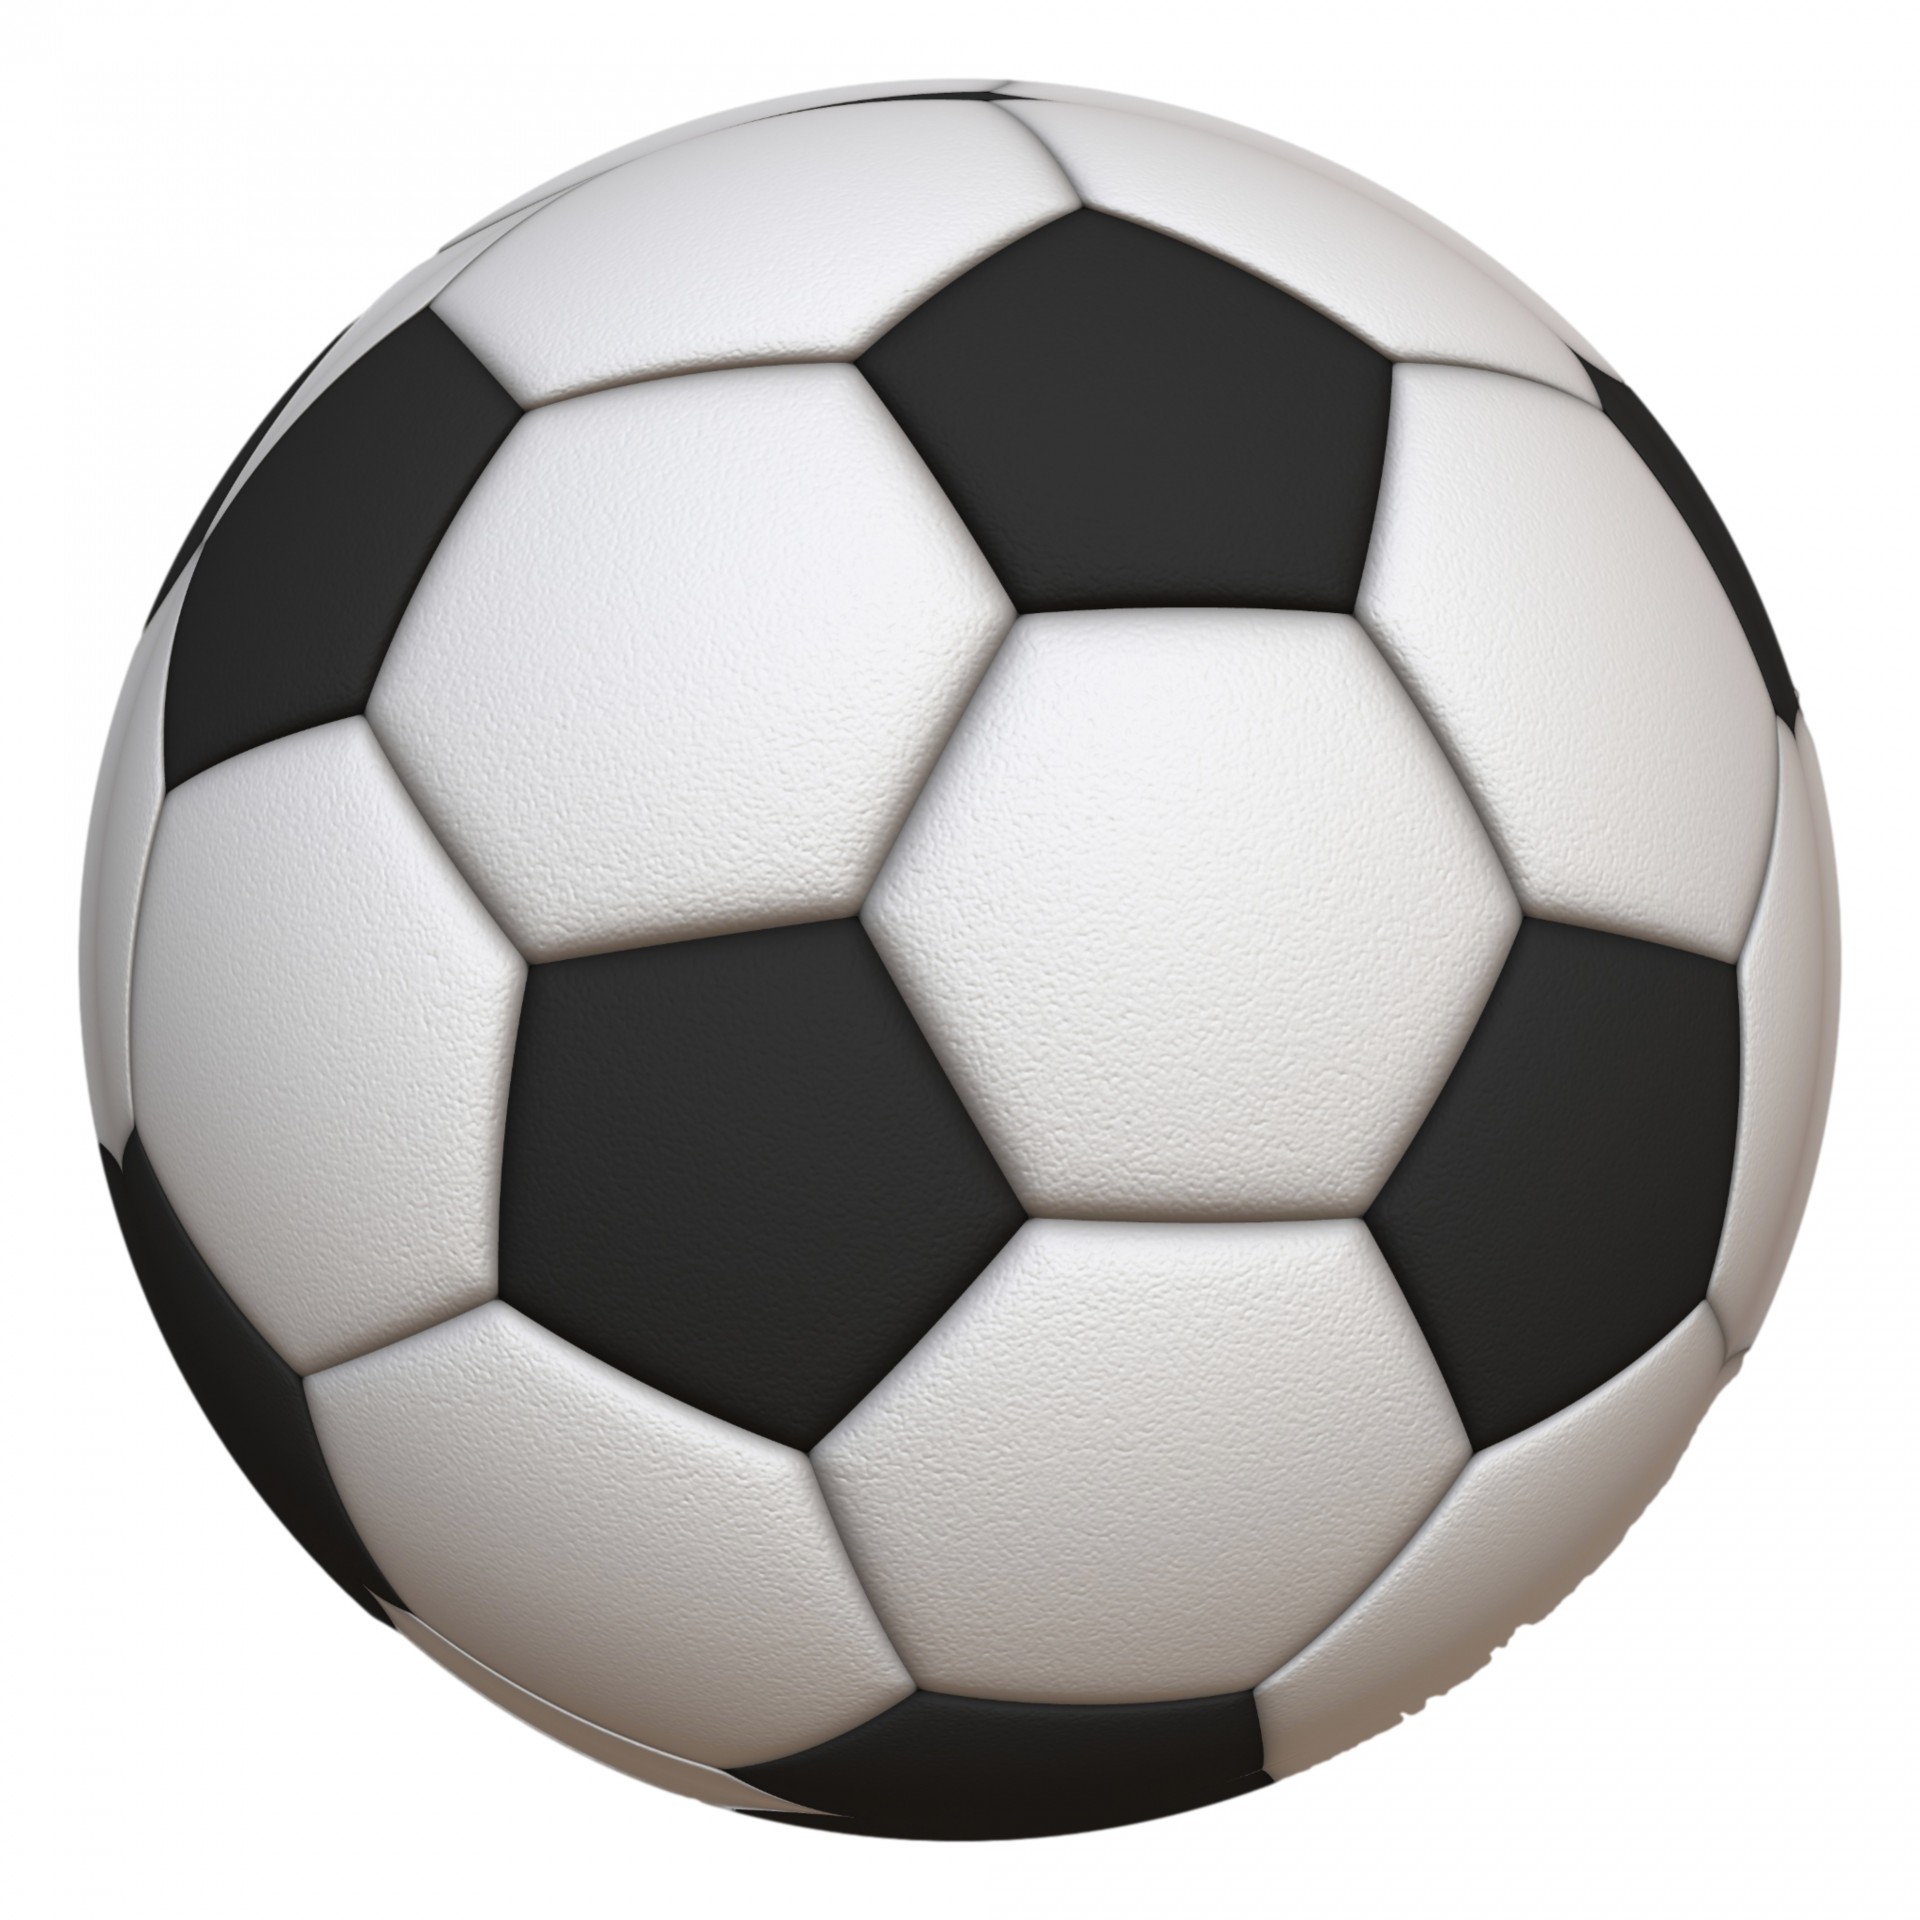 Soccer Ball 2 Free Stock Photo - Public Domain Pictures